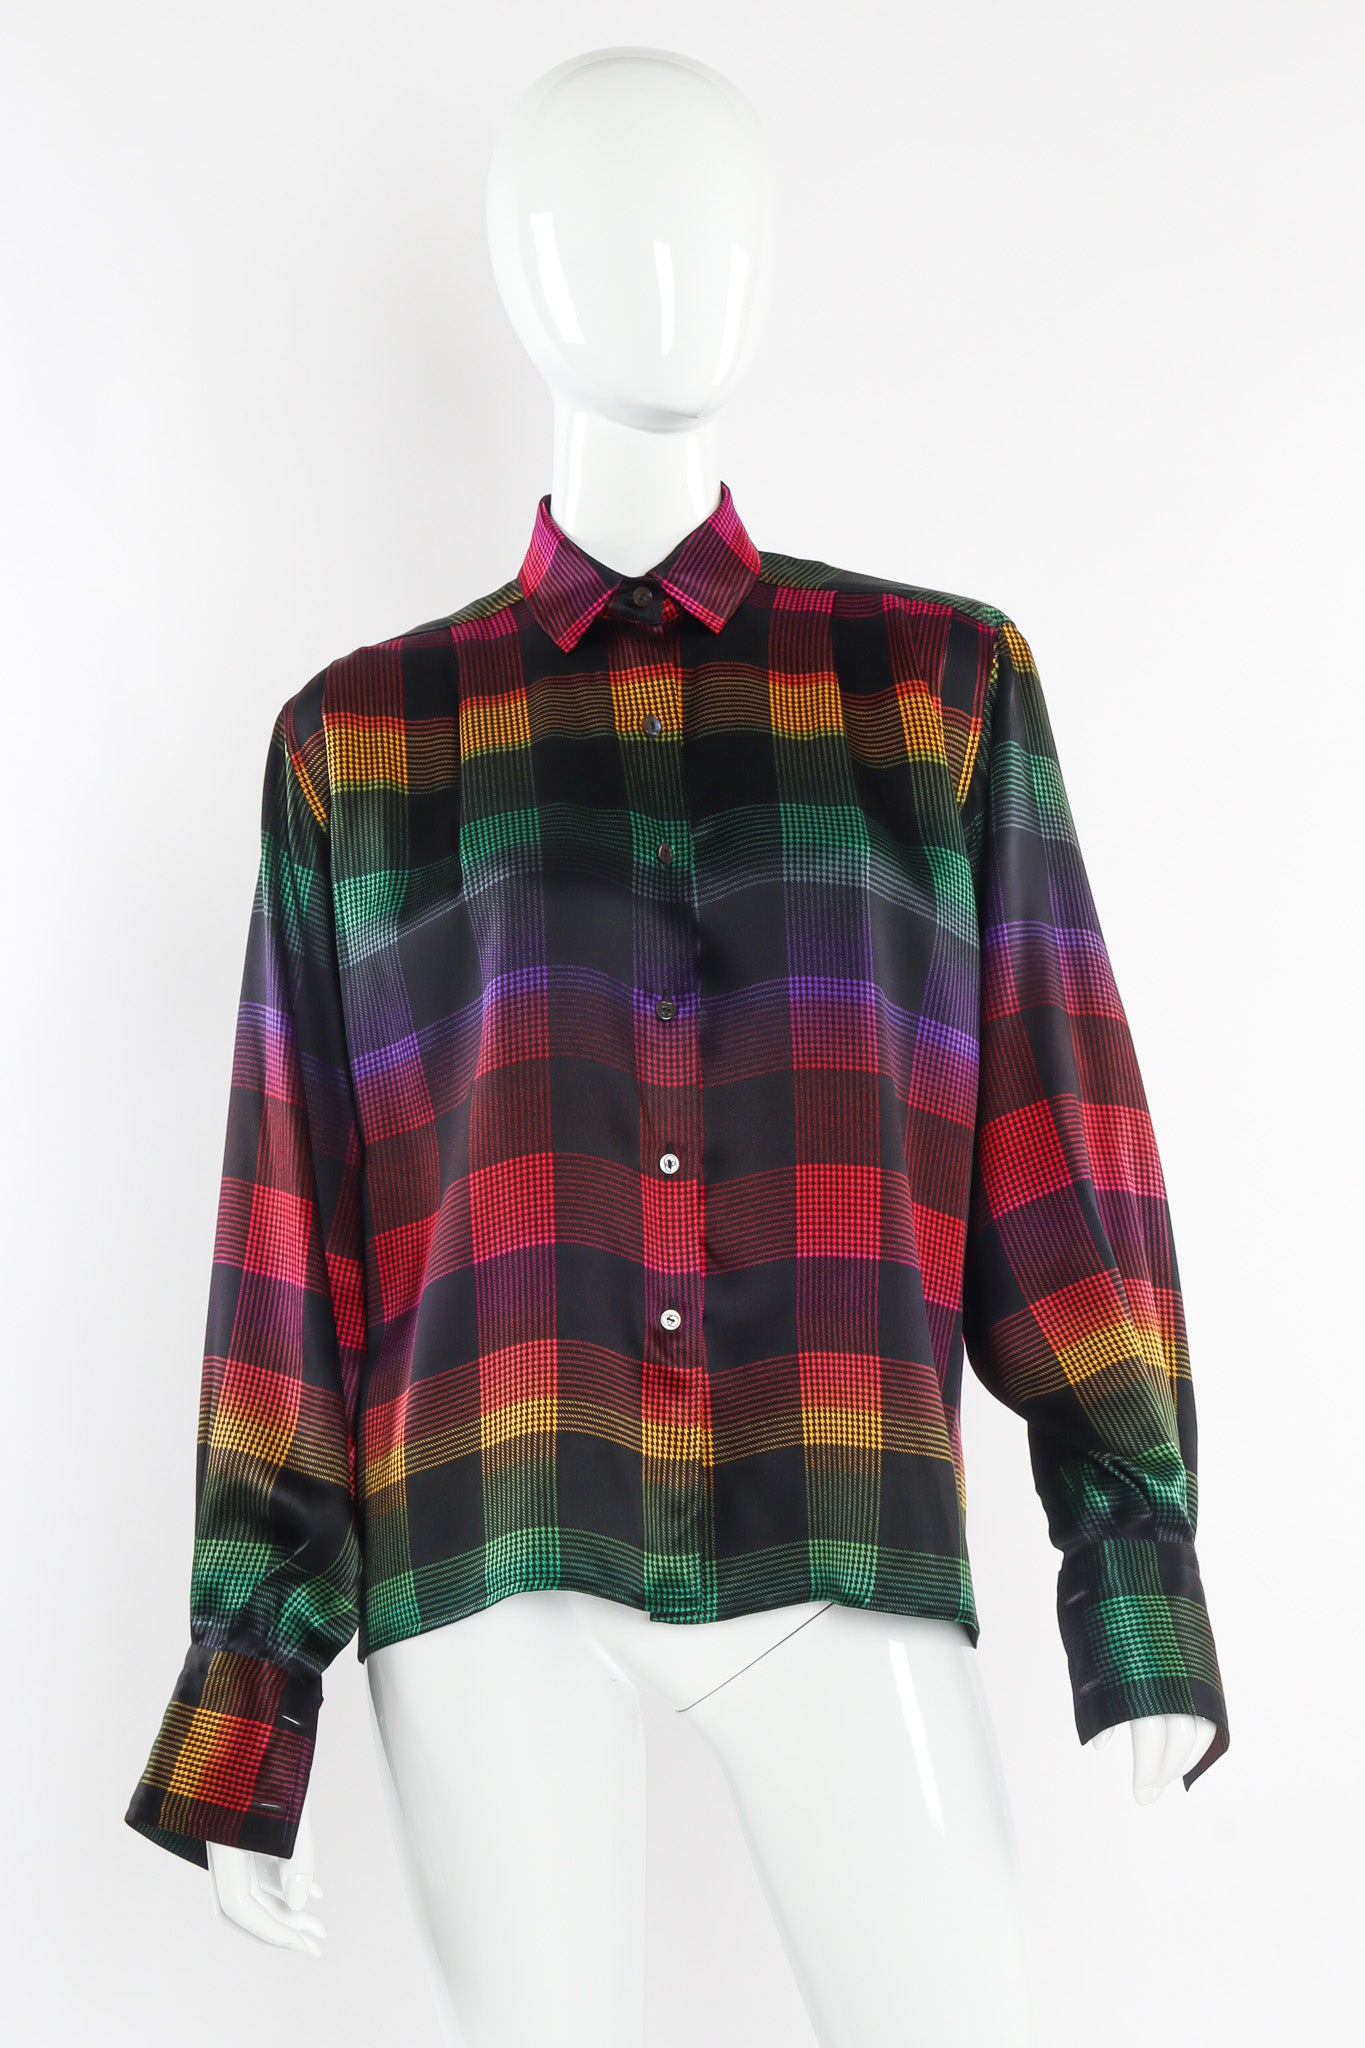 Houndstooth plaid silk blouse by Gucci front view @recessla